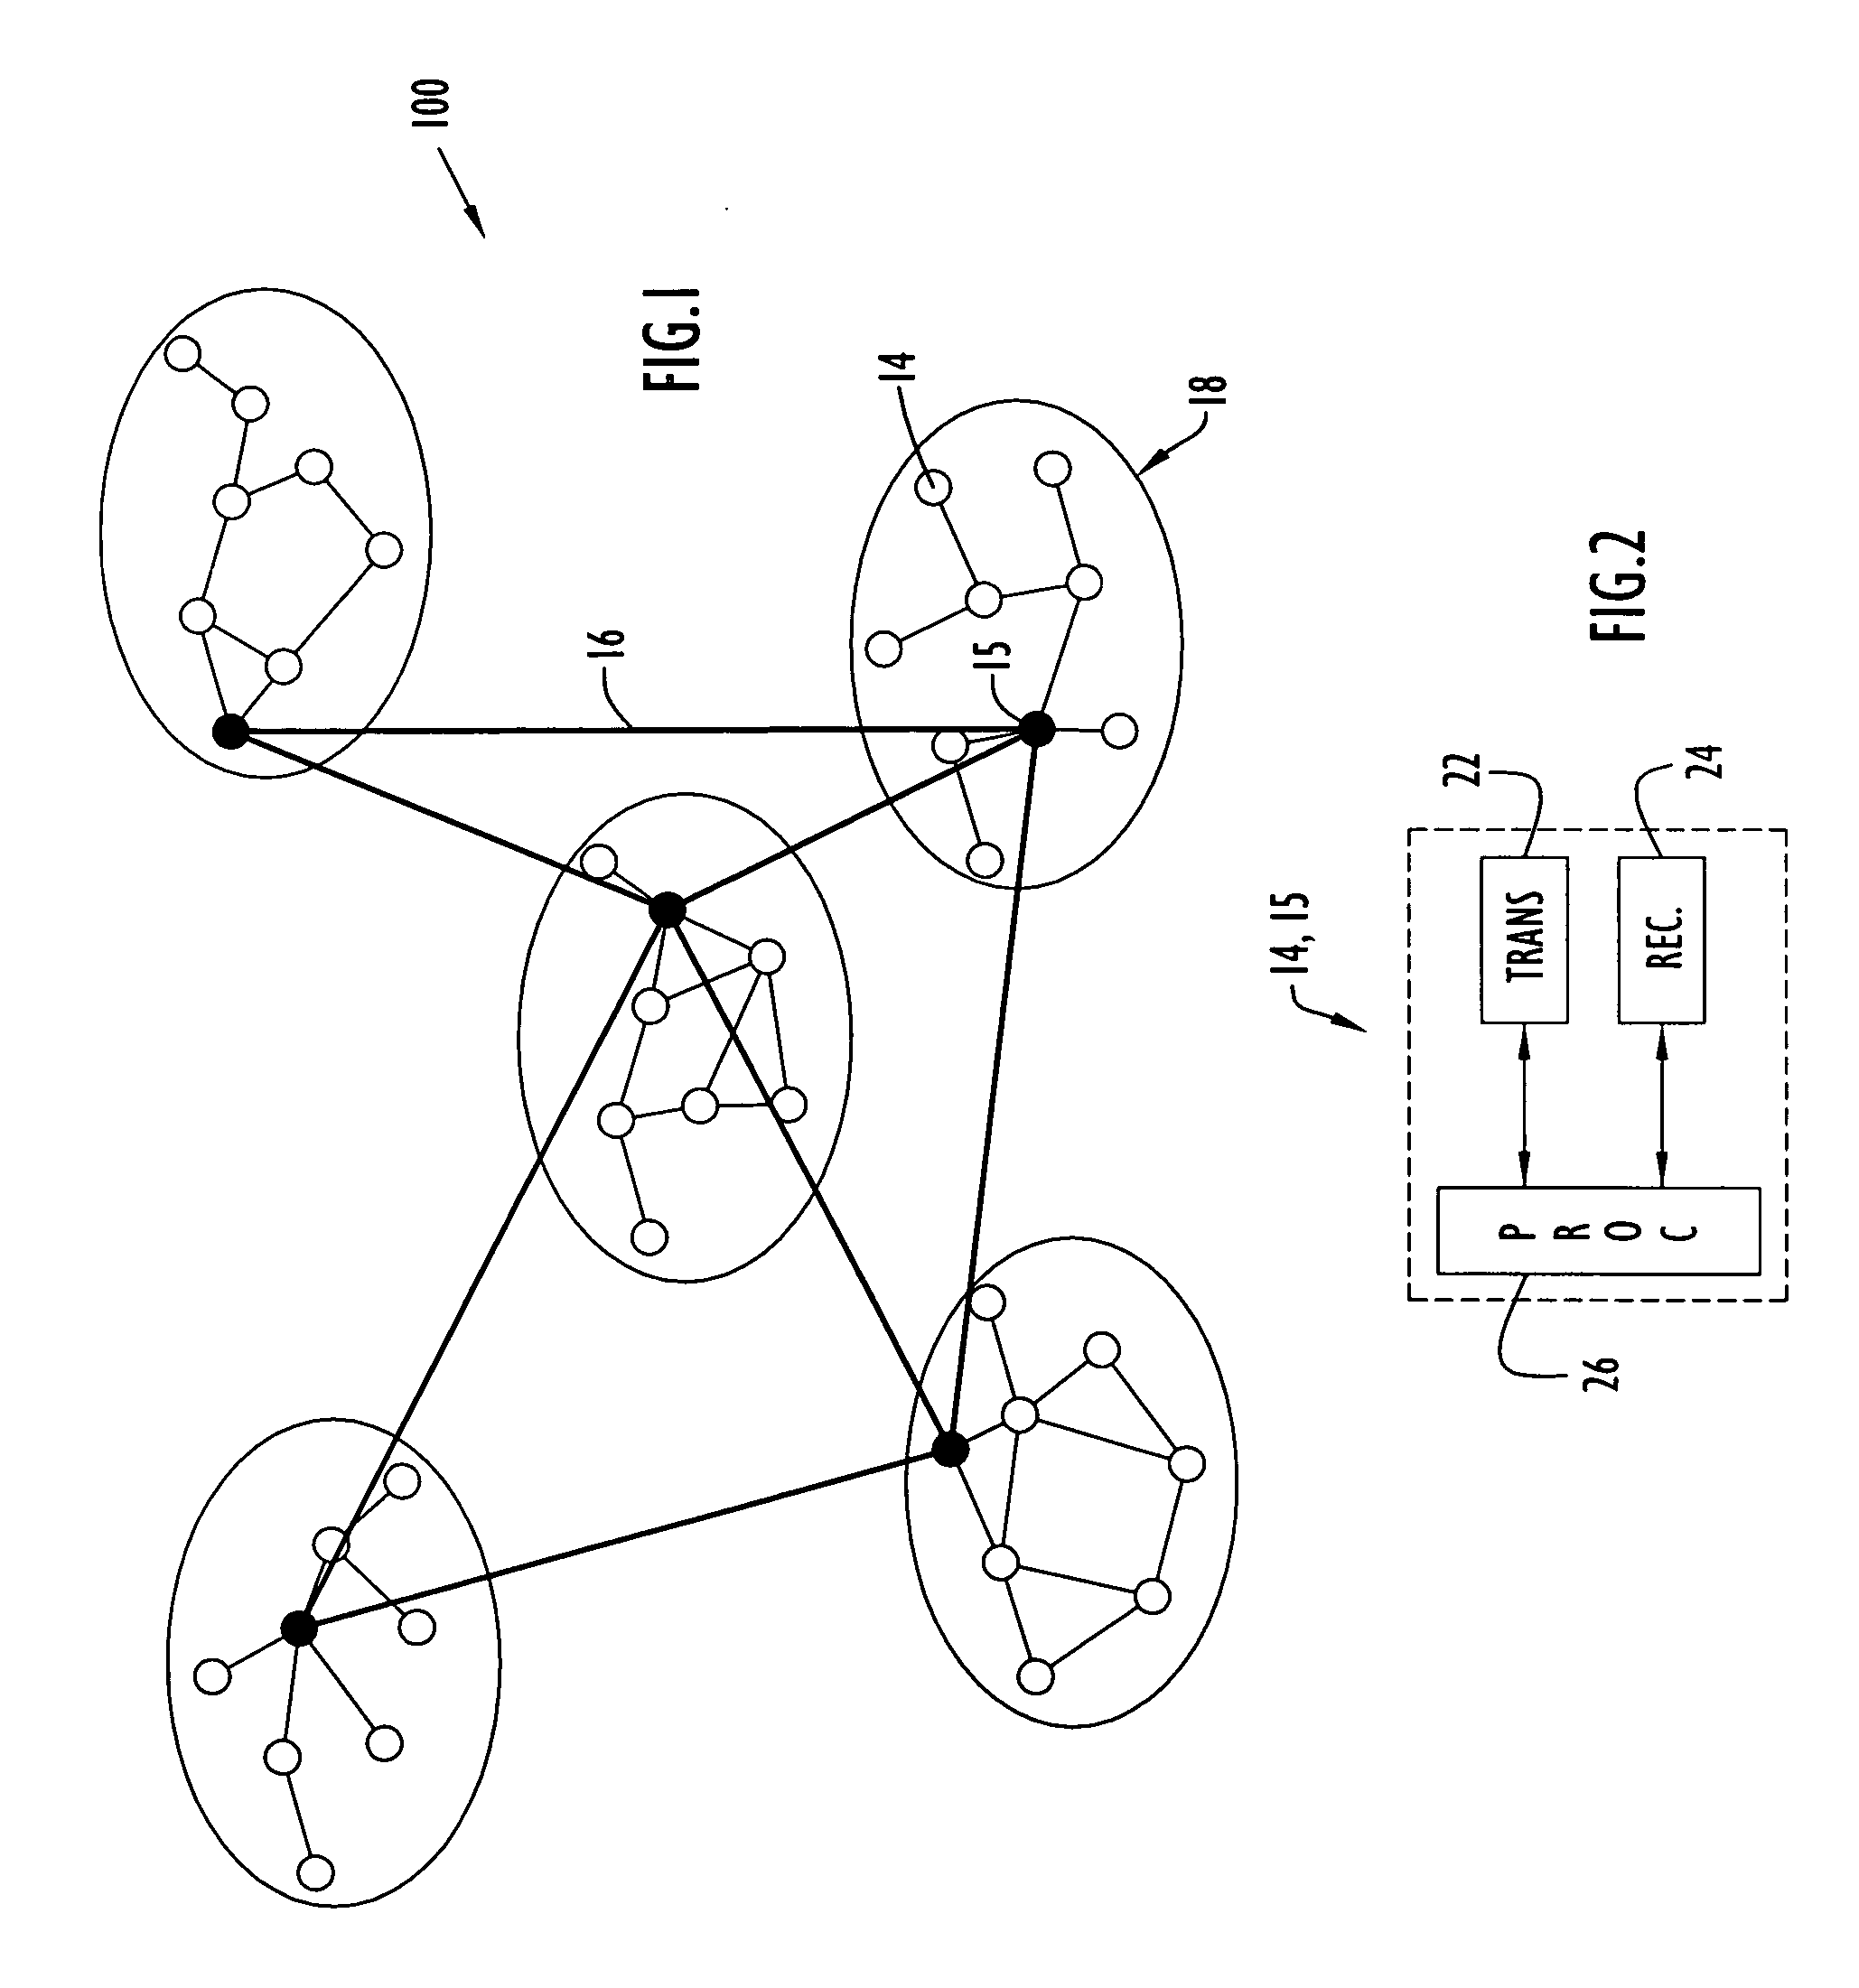 Method and apparatus for multipoint voice operation in a wireless, AD-HOC environment